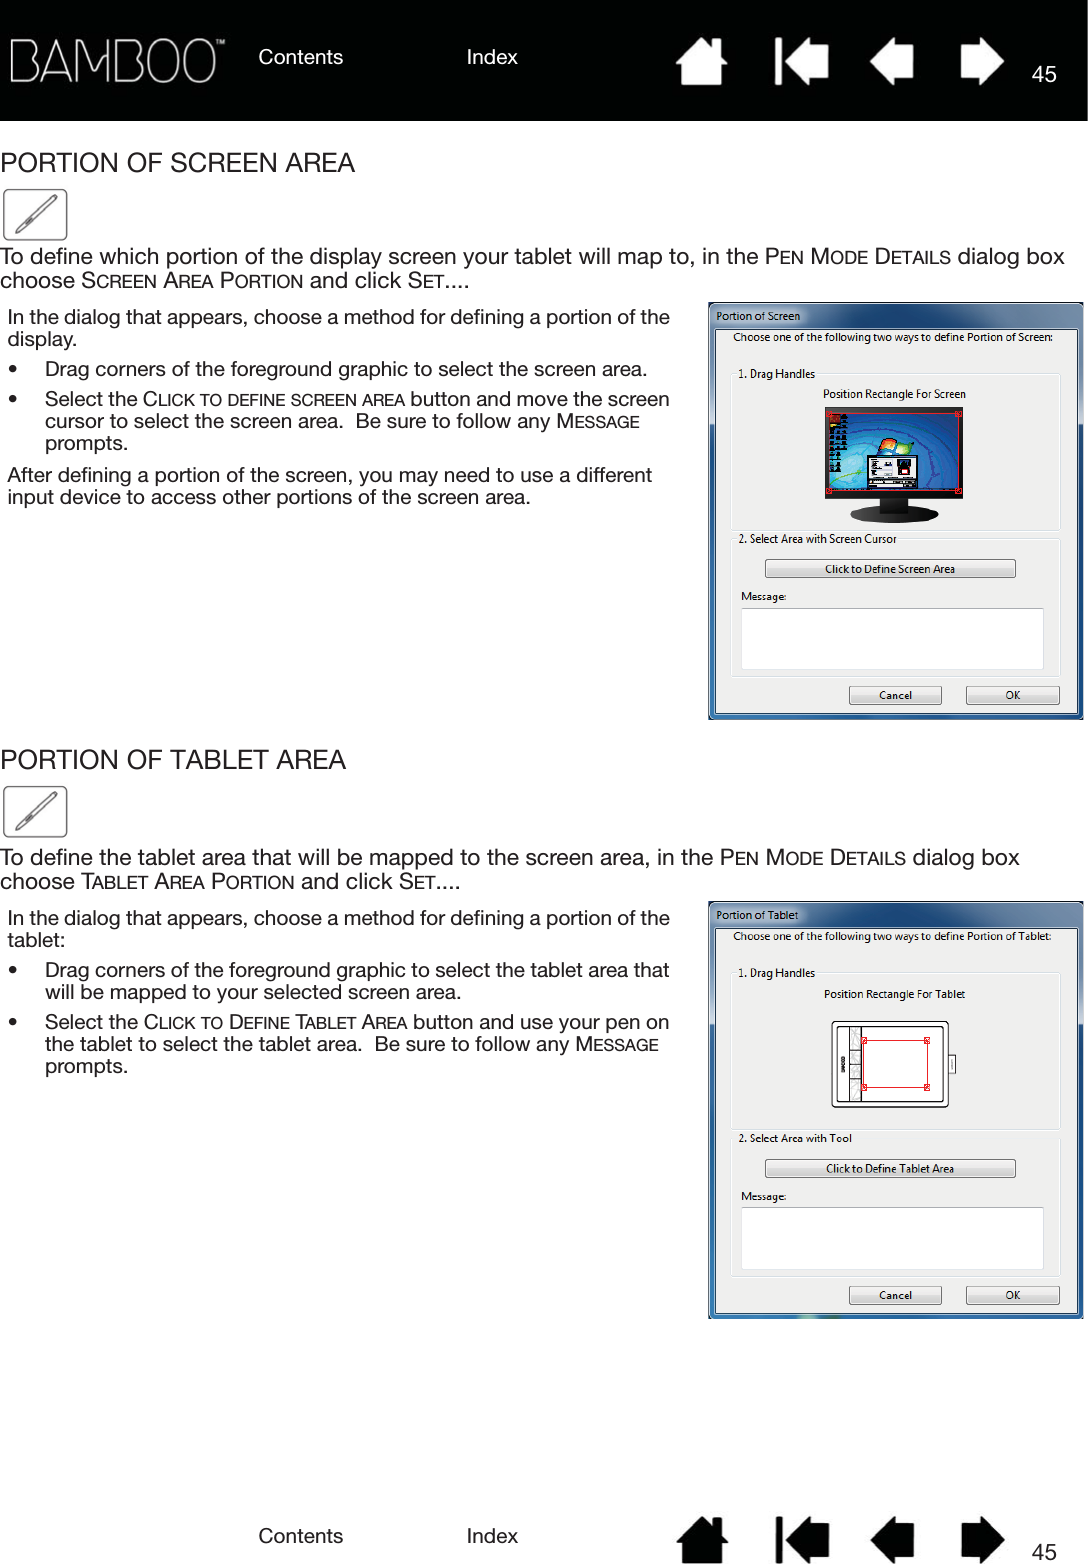 Contents IndexContents 45Index45PORTION OF SCREEN AREATo define which portion of the display screen your tablet will map to, in the PEN MODE DETAILS dialog box choose SCREEN AREA PORTION and click SET....PORTION OF TABLET AREATo define the tablet area that will be mapped to the screen area, in the PEN MODE DETAILS dialog box choose TABLET AREA PORTION and click SET....In the dialog that appears, choose a method for defining a portion of the display.• Drag corners of the foreground graphic to select the screen area.• Select the CLICK TO DEFINE SCREEN AREA button and move the screen cursor to select the screen area.  Be sure to follow any MESSAGE prompts.After defining a portion of the screen, you may need to use a different input device to access other portions of the screen area.In the dialog that appears, choose a method for defining a portion of the tablet:• Drag corners of the foreground graphic to select the tablet area that will be mapped to your selected screen area.• Select the CLICK TO DEFINE TABLET AREA button and use your pen on the tablet to select the tablet area.  Be sure to follow any MESSAGE prompts.